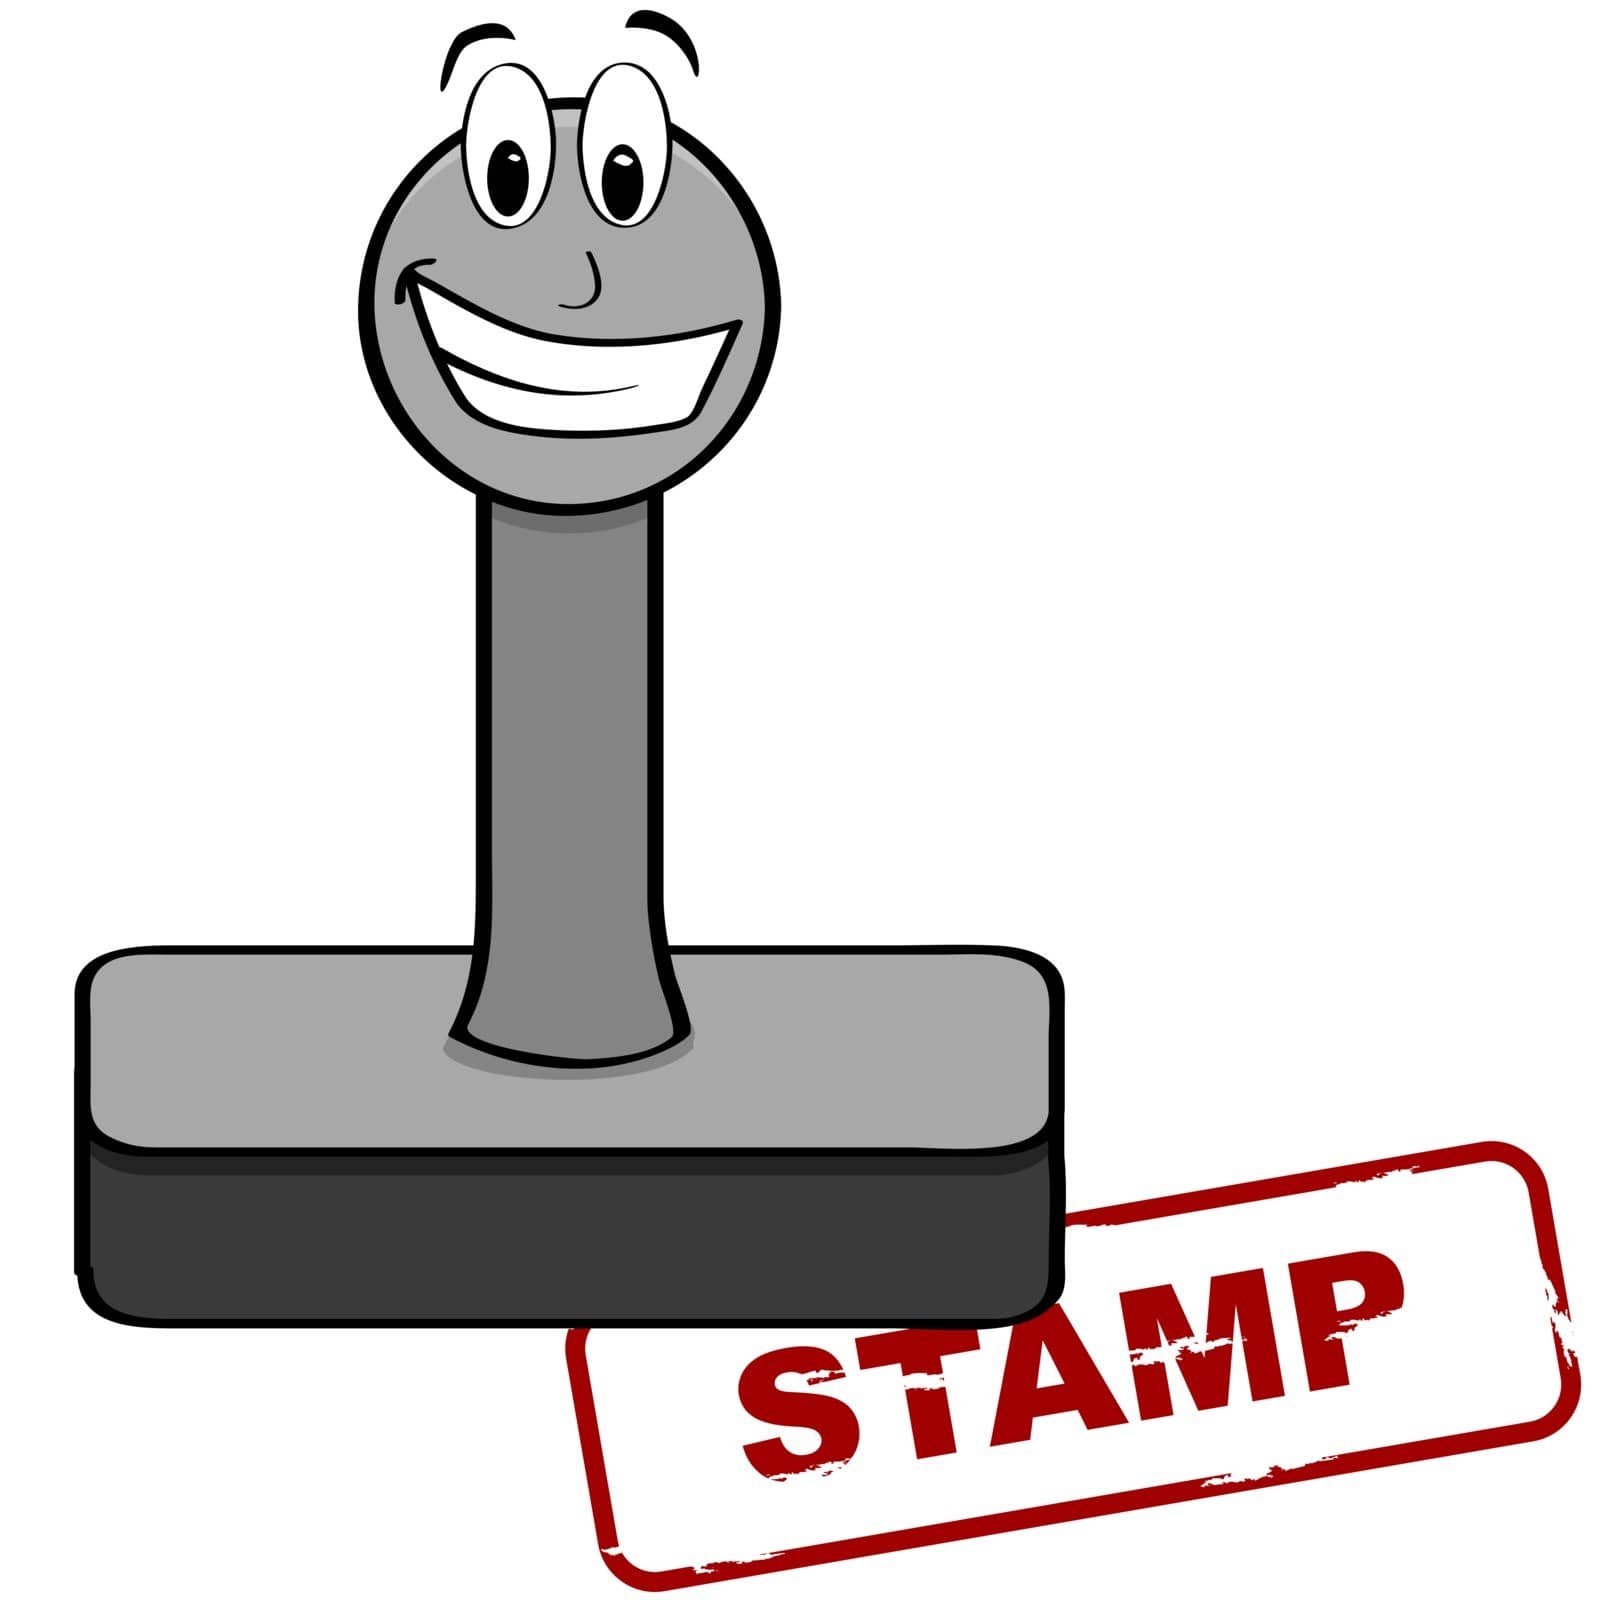 Cartoon illustration showing a stamp with a happy face